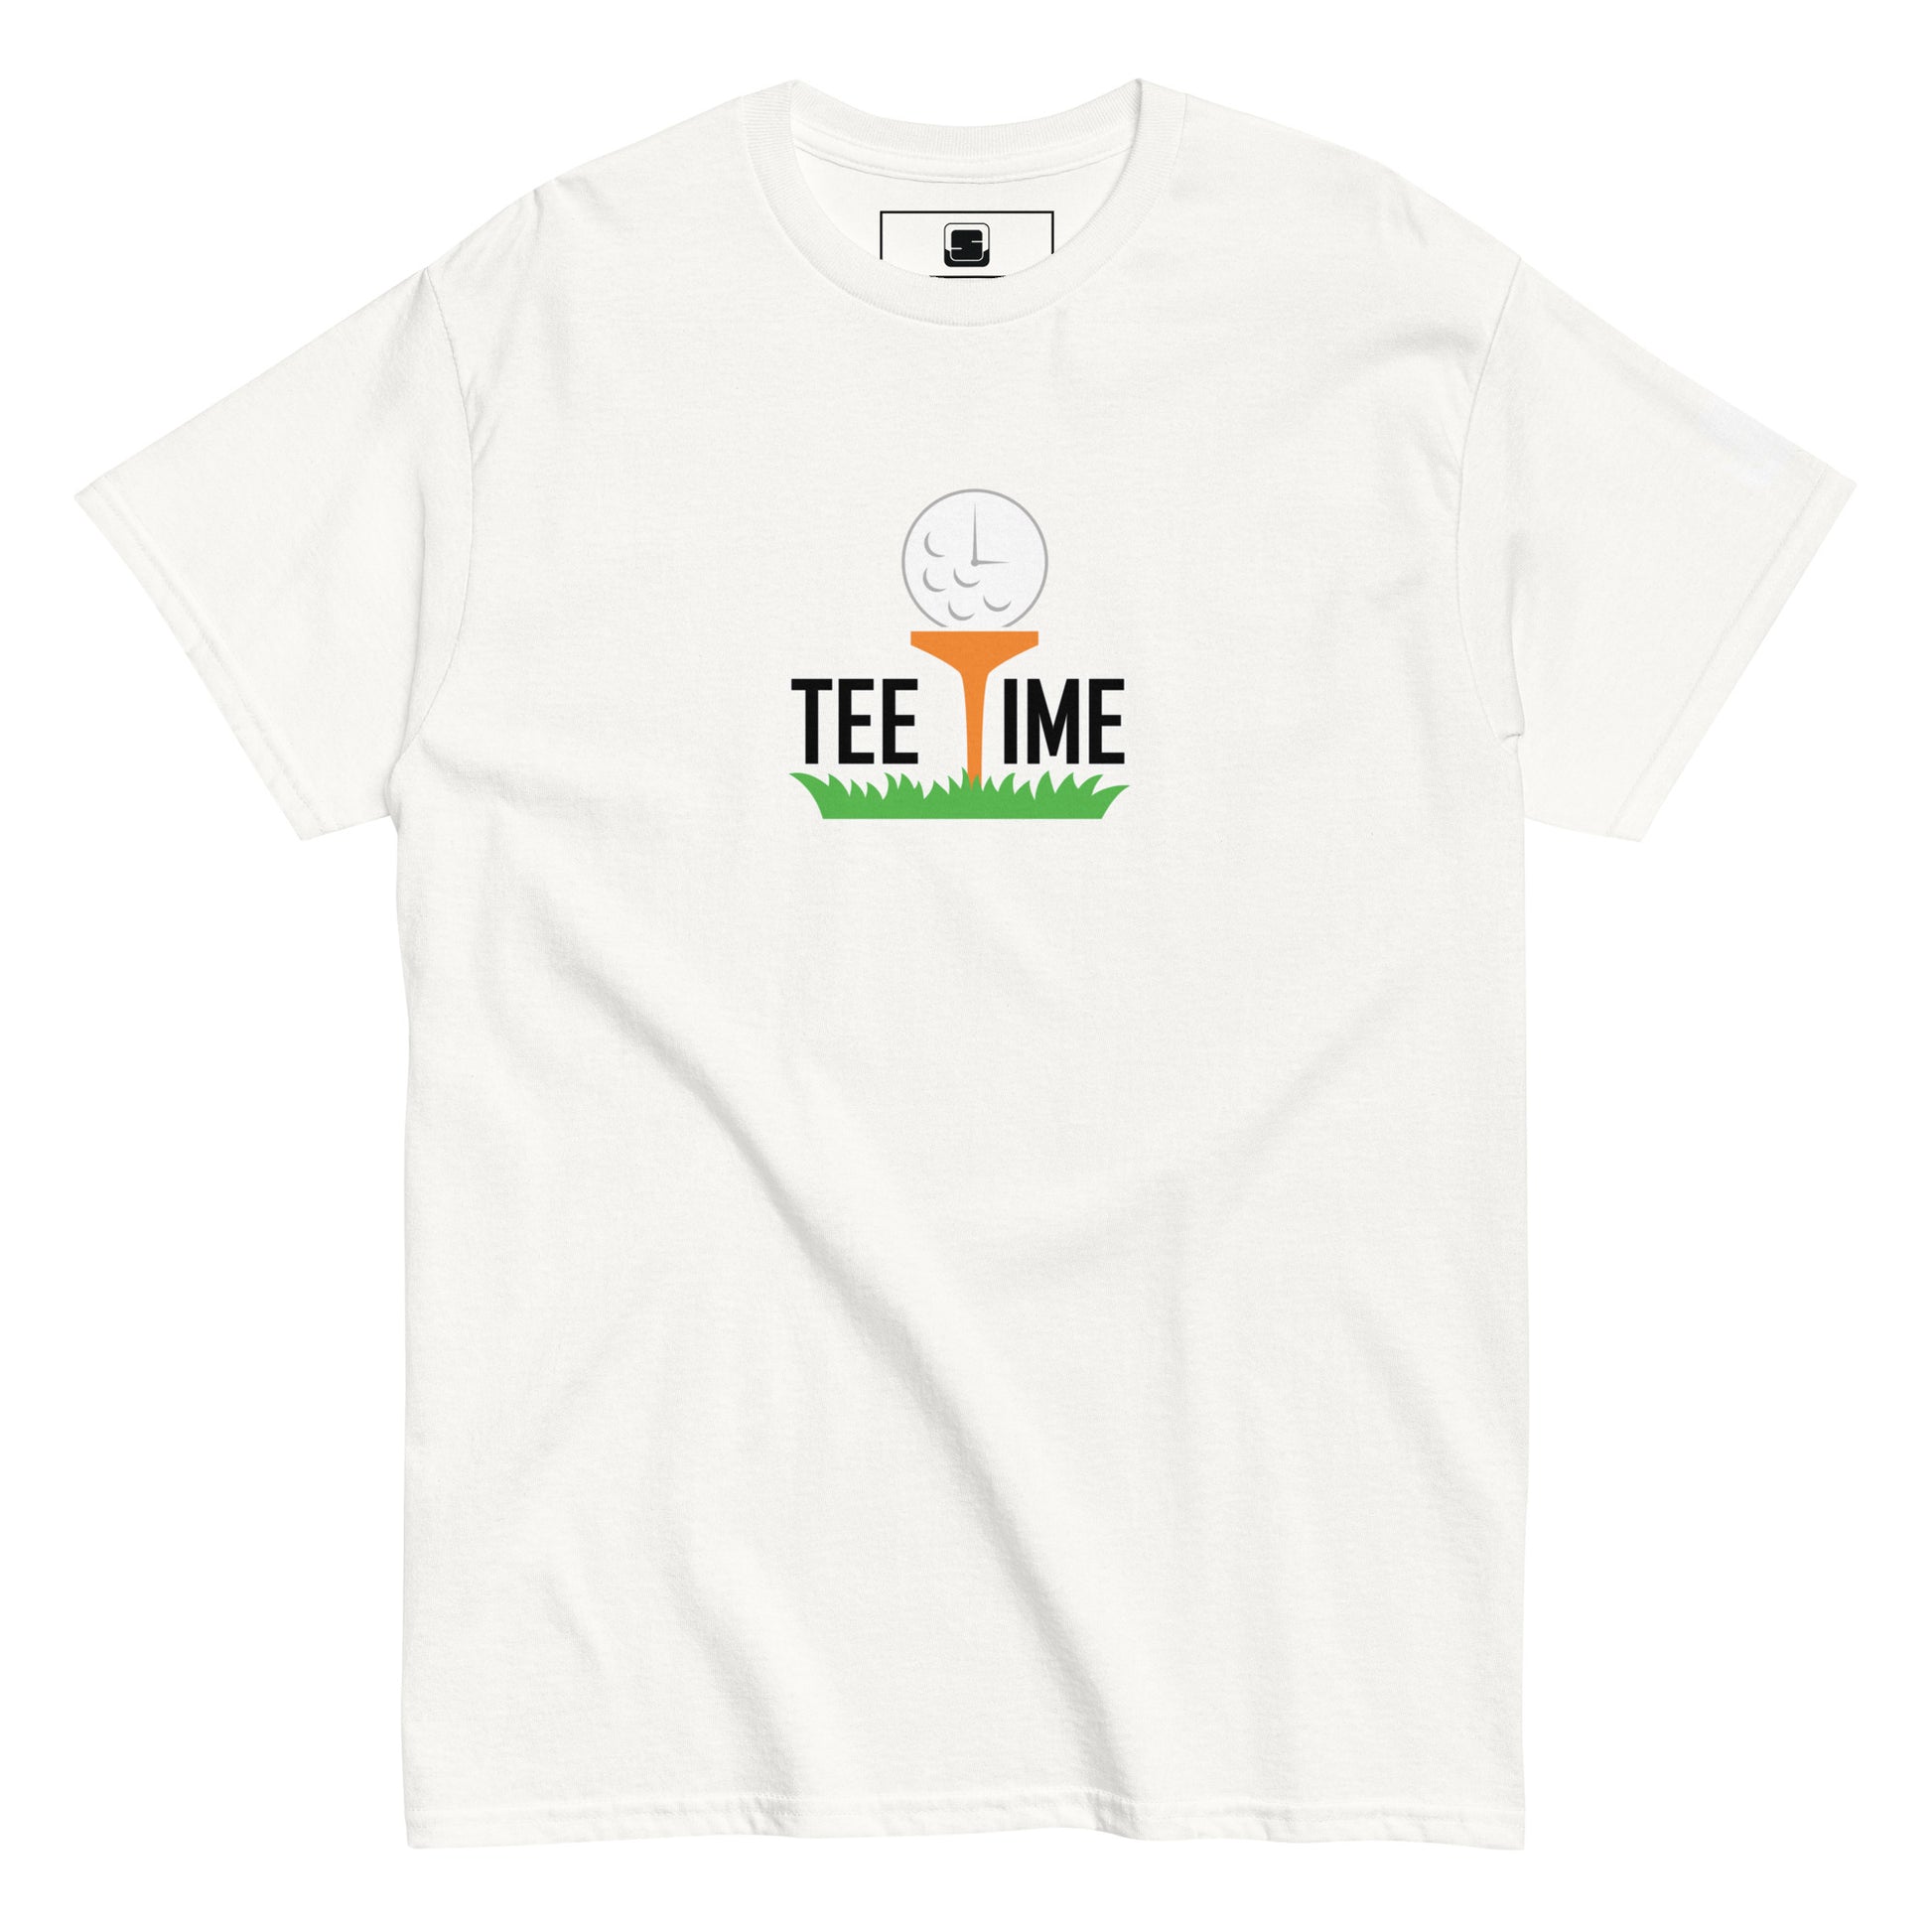 White short-sleeved t-shirt with a 'Tee Time' graphic showing a golf ball character on grass on the chest and a small logo patch on the sleeve, against a white background.